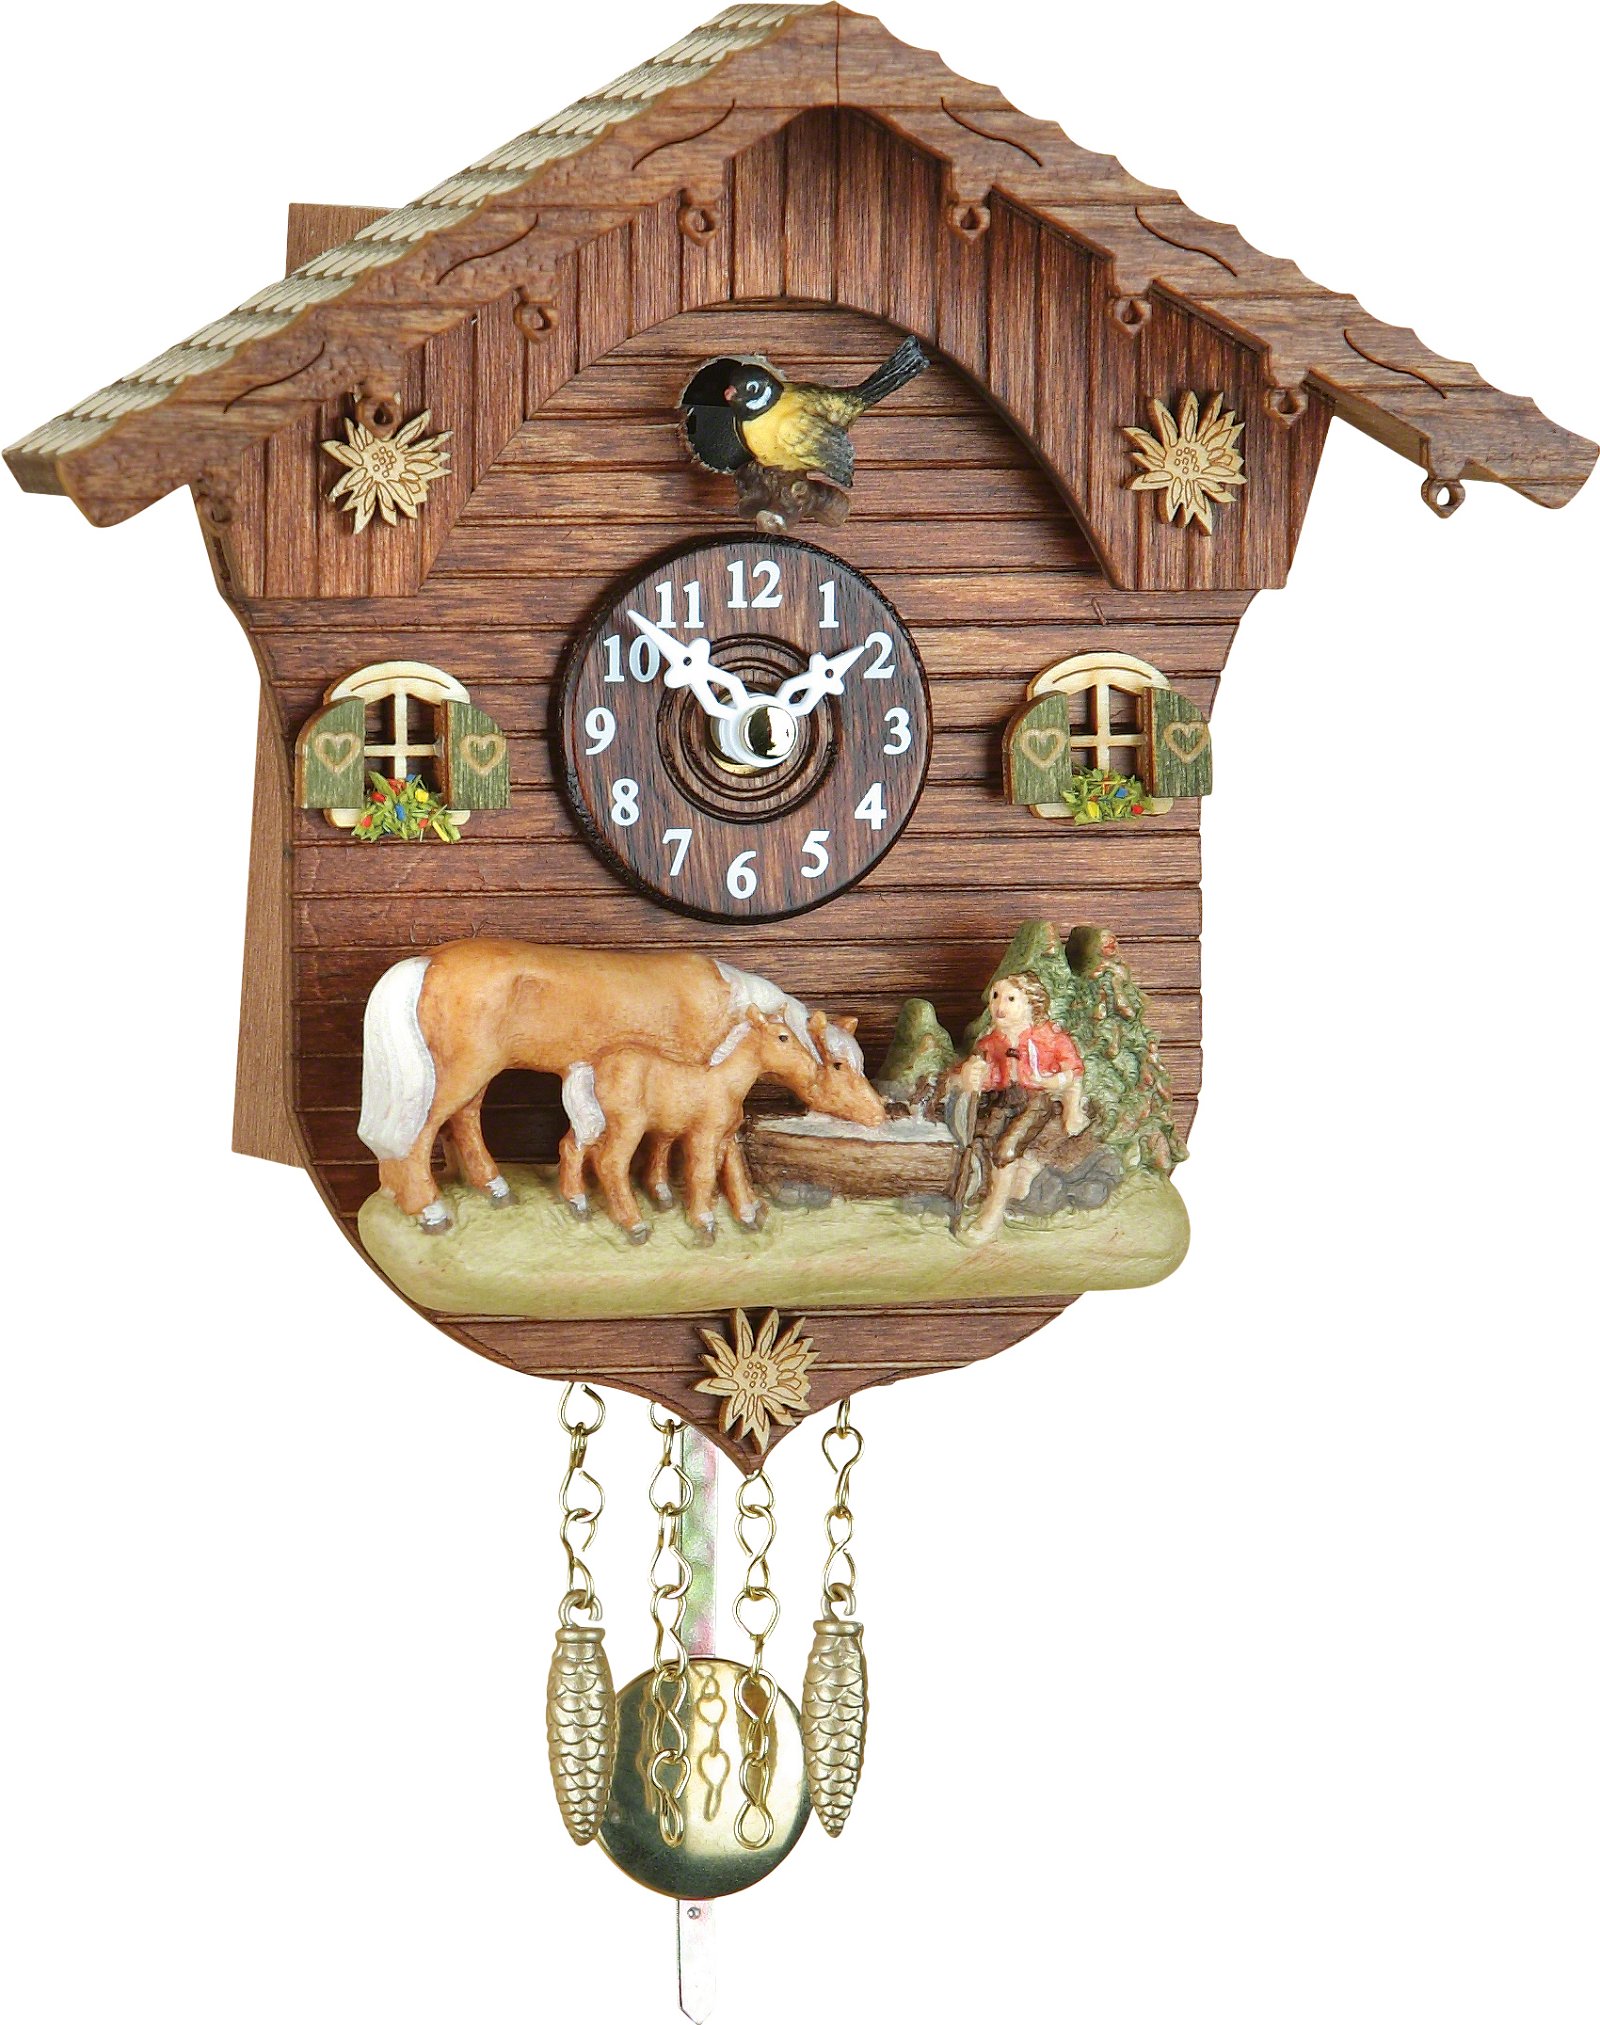 Trenkle Kuckulino Black Forest Clock with Quartz Movement and Cuckoo Chime ...